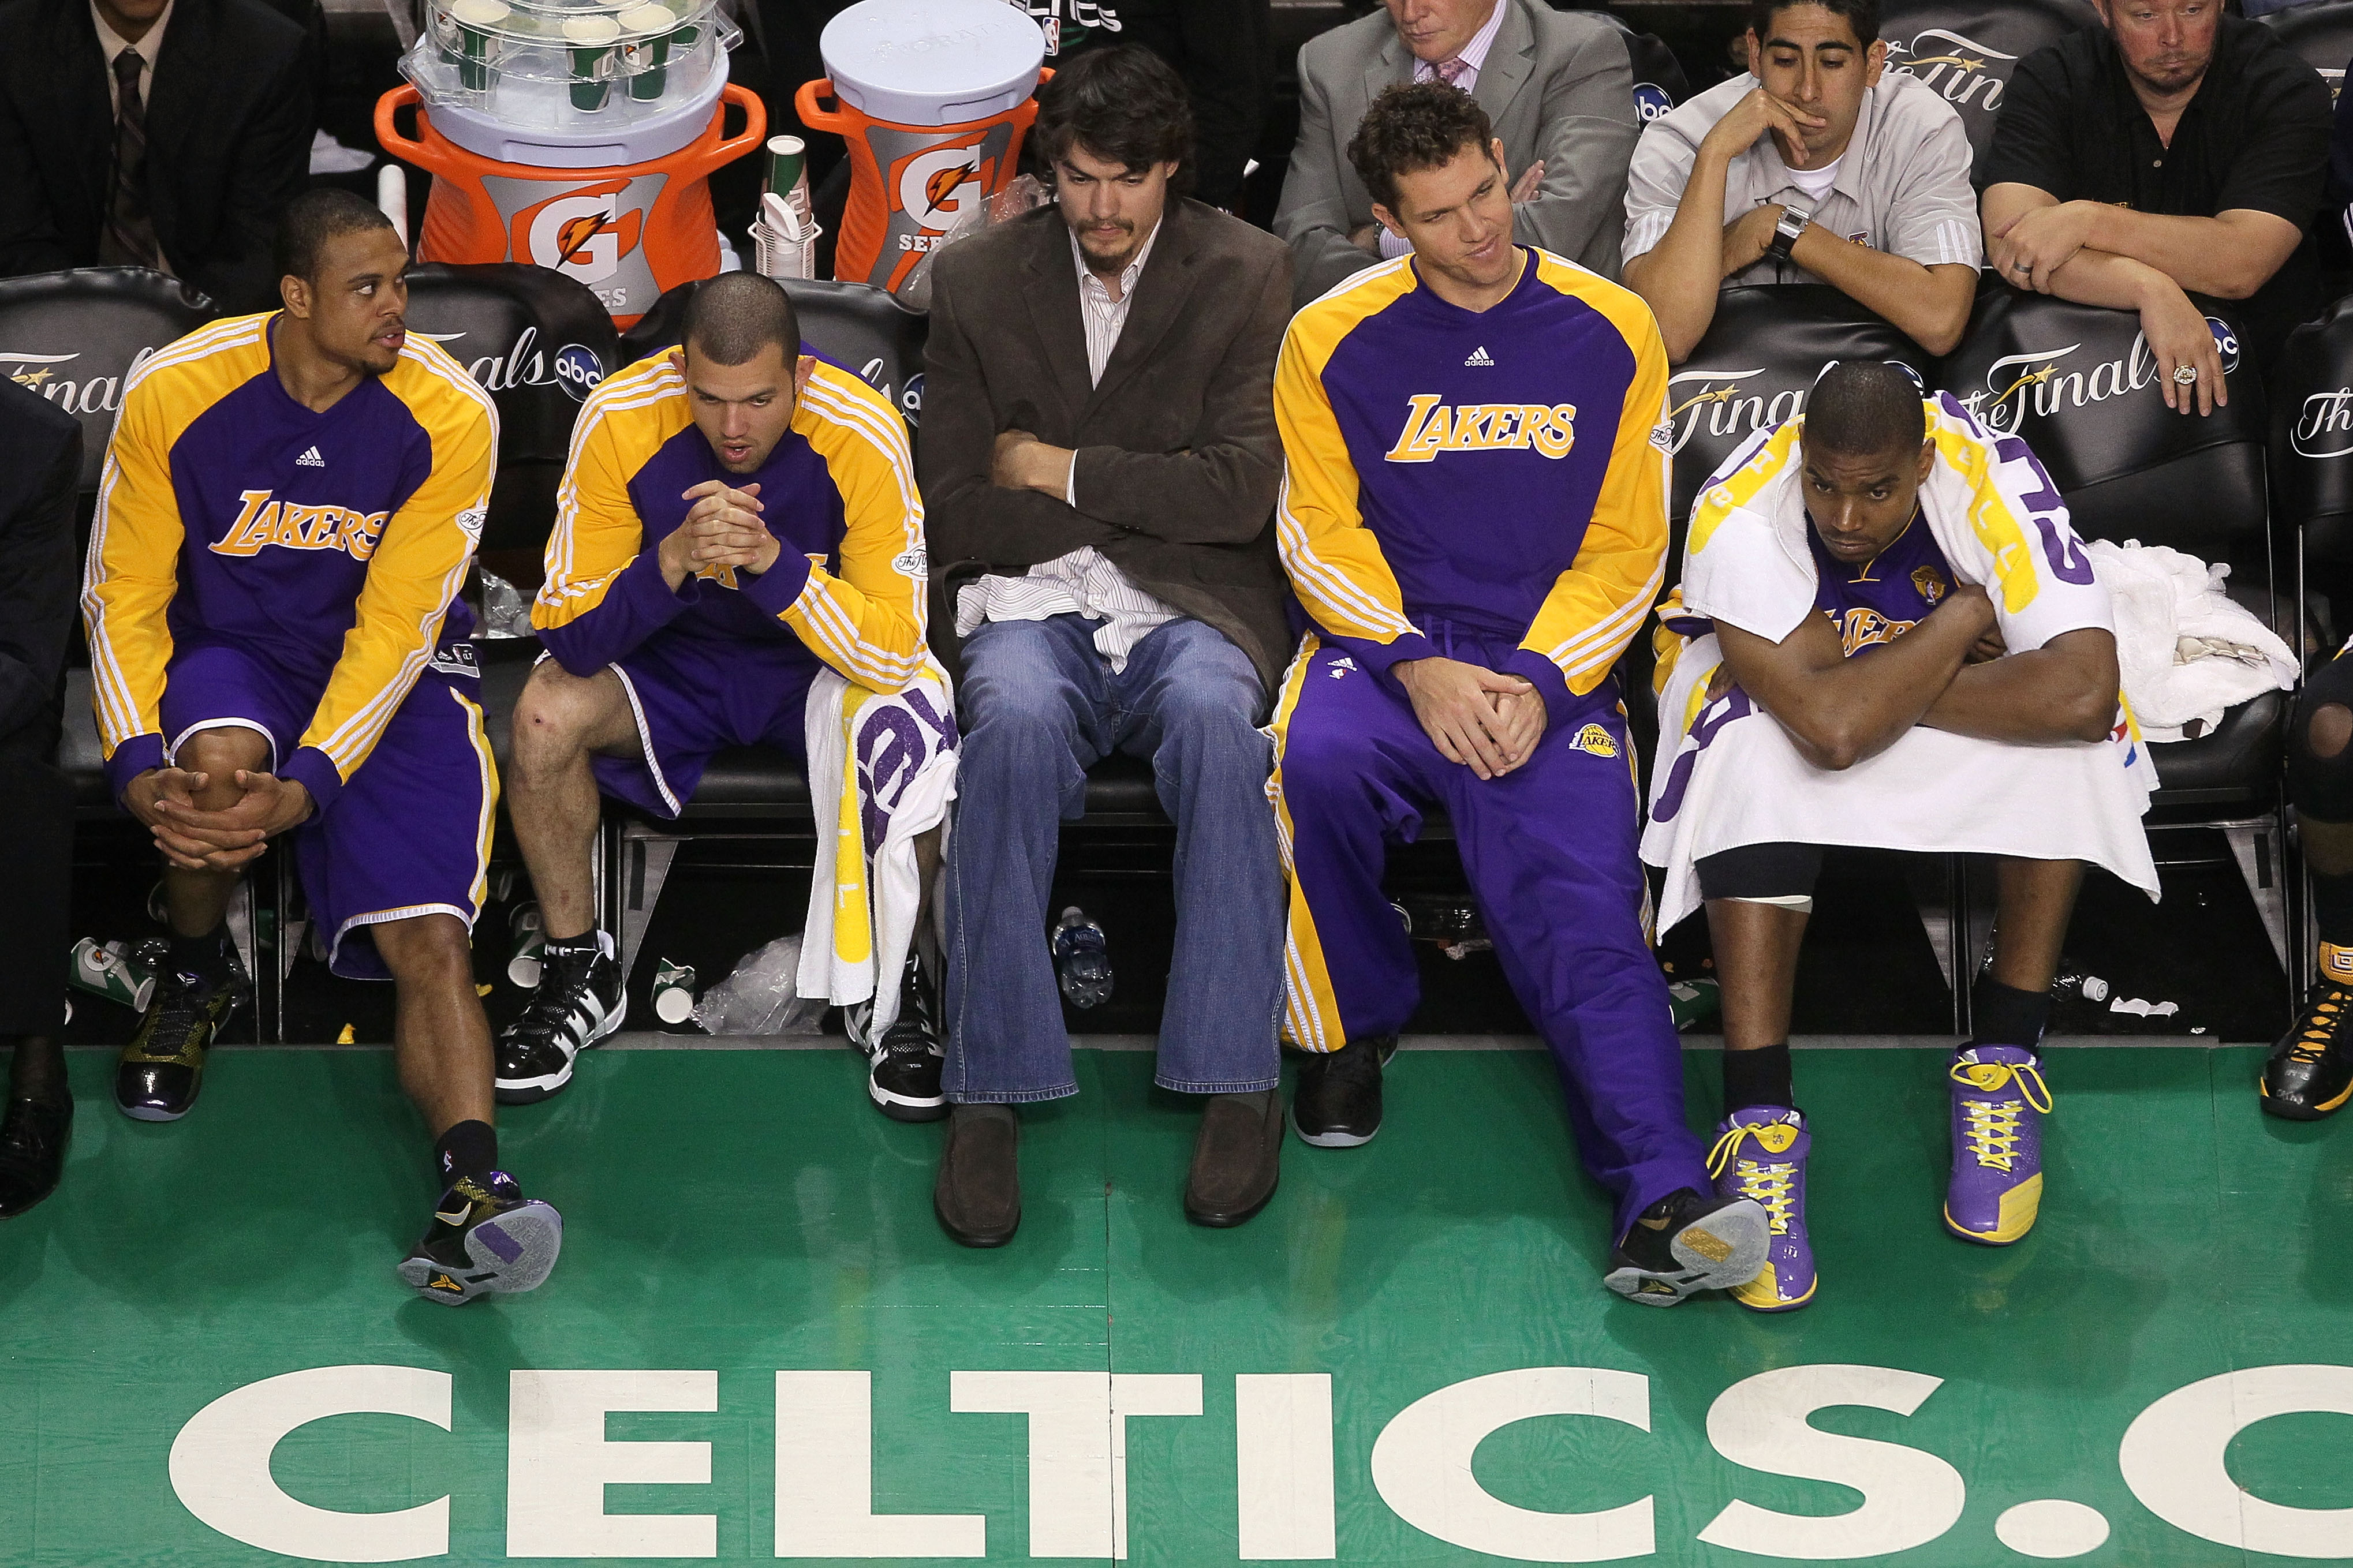 BOSTON - JUNE 10:  (L-R) Shannon Brown, Jordan Farmar, Adam Morrison, Luke Walton and Andrew Bynum of the Los Angeles Lakers look on dejected from the bench late in the fourth quarter against the Boston Celltics during Game Four of the 2010 NBA Finals on